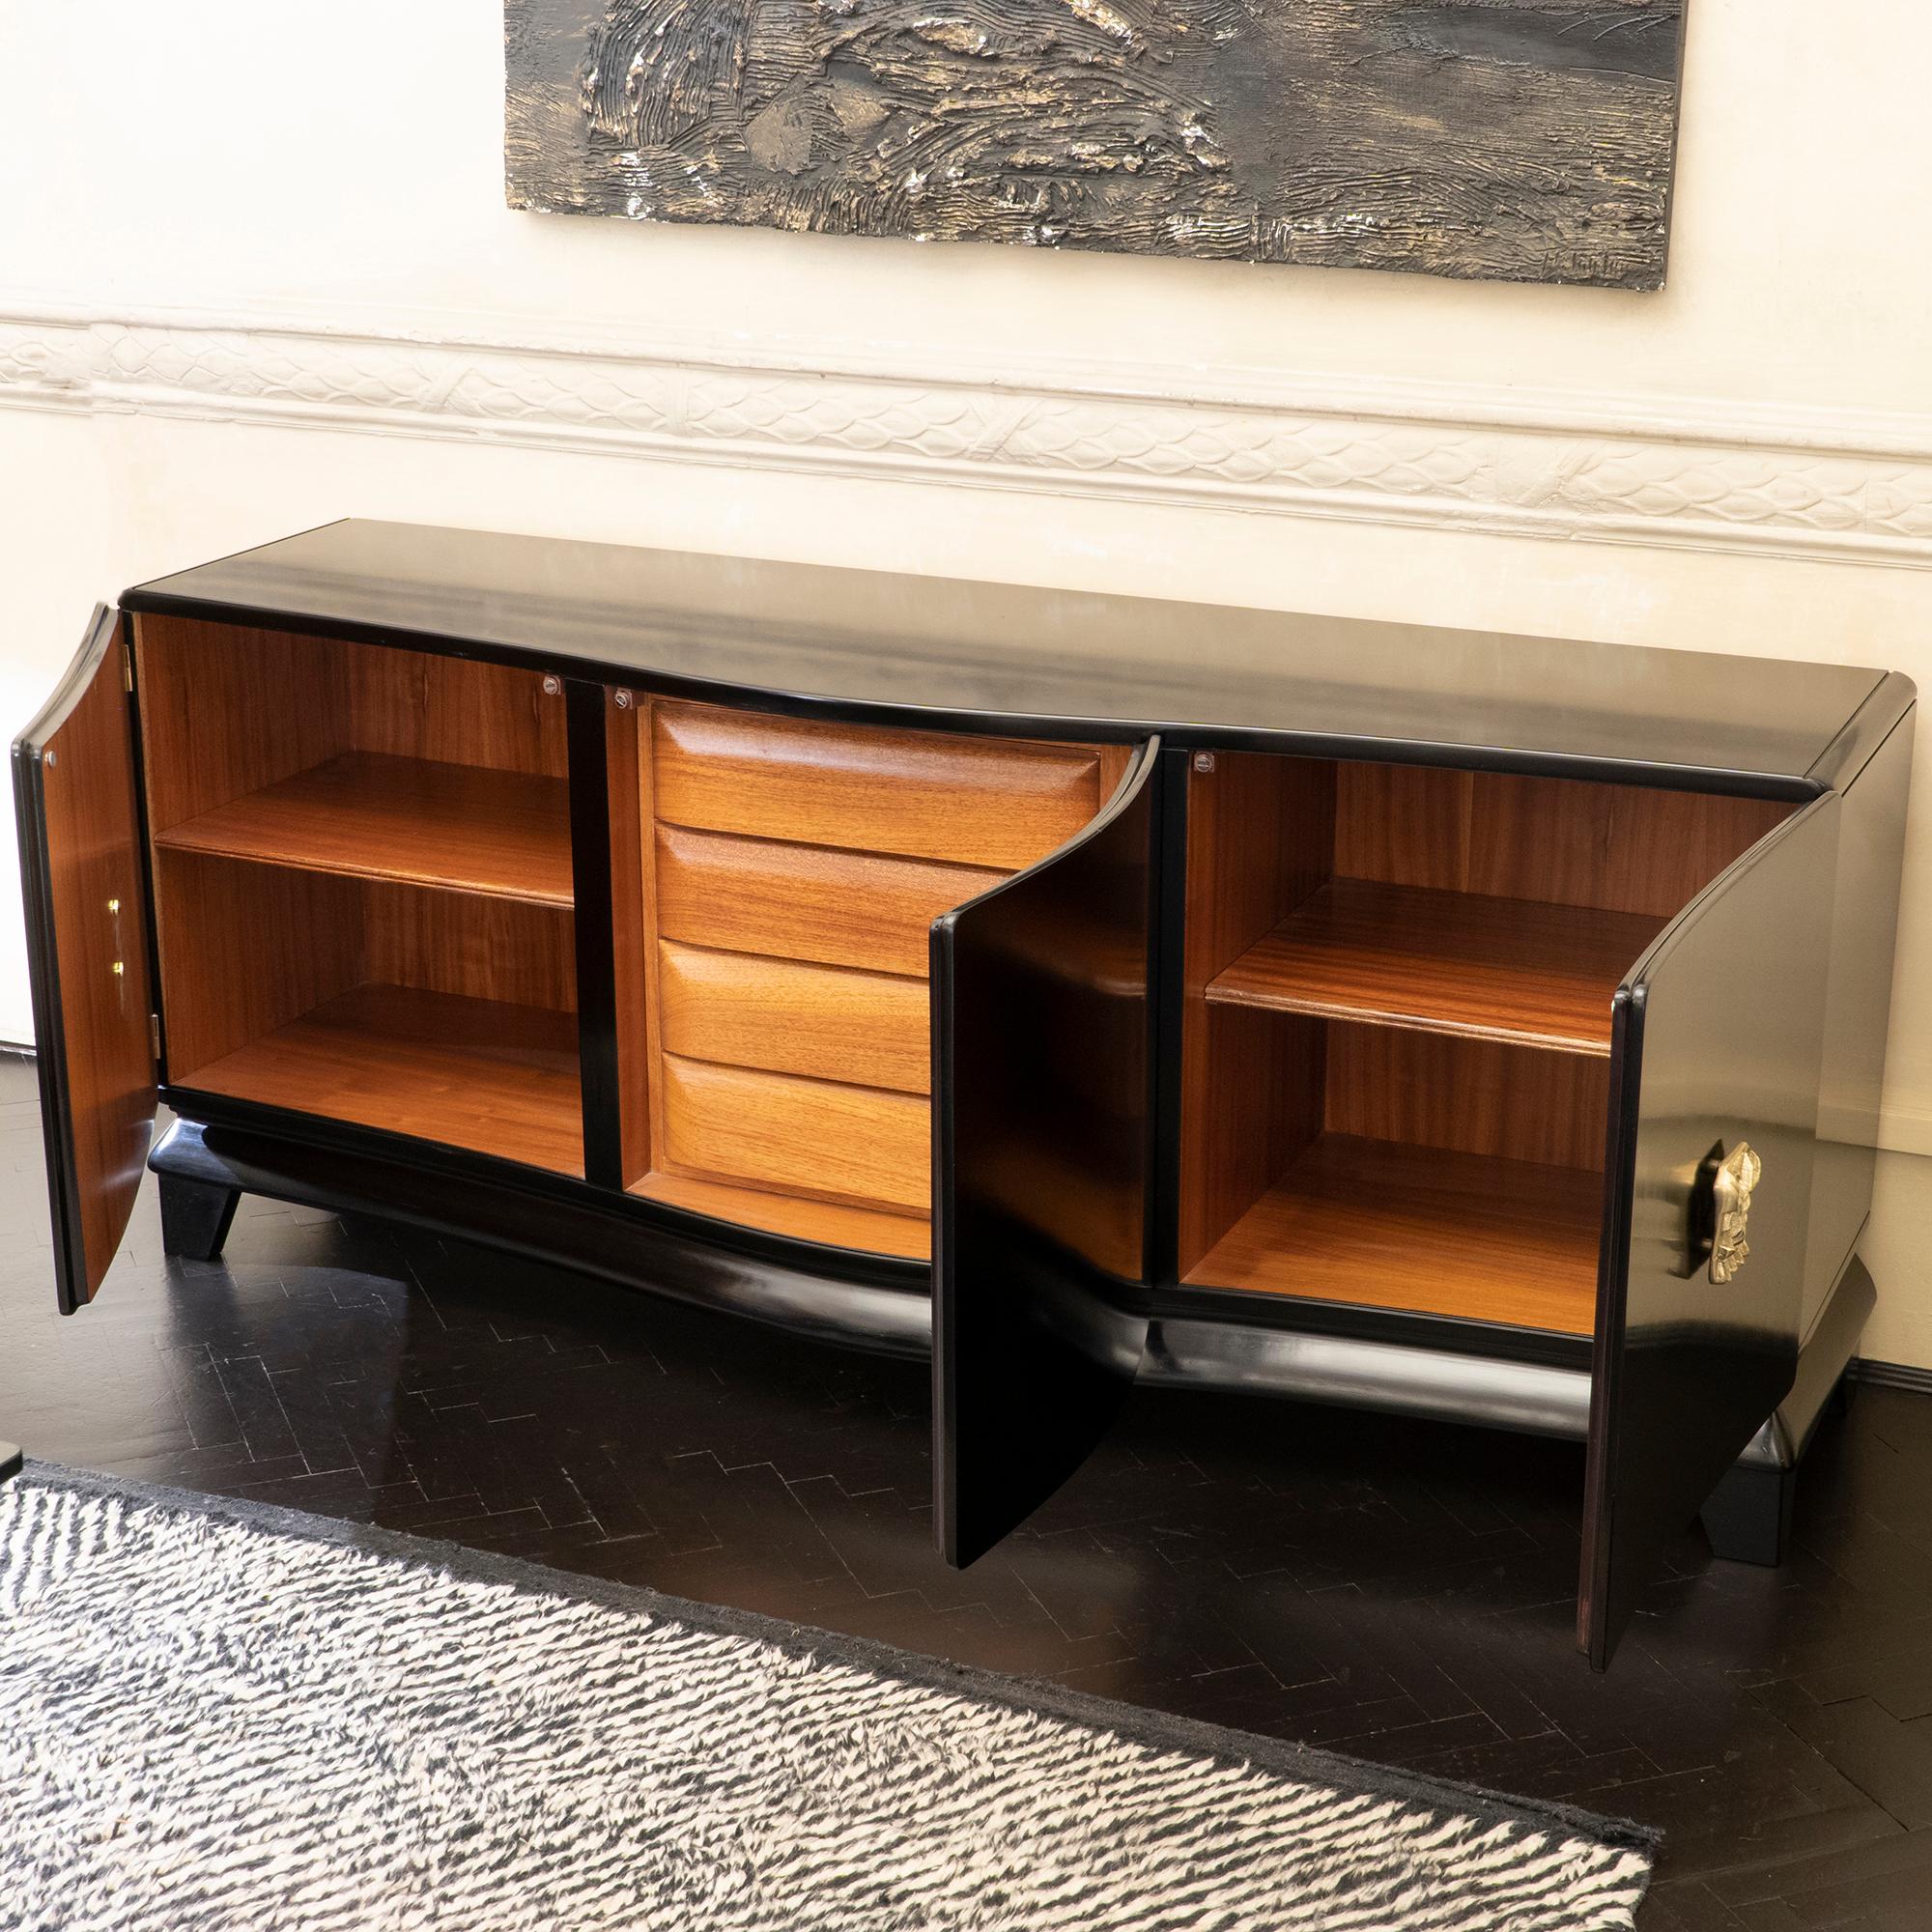 Ebonized palisander sideboard by Luciano Frigerio, central four drawers and two side section with one removable shelve, new custom sculptural brass handle, Italy, 1966.